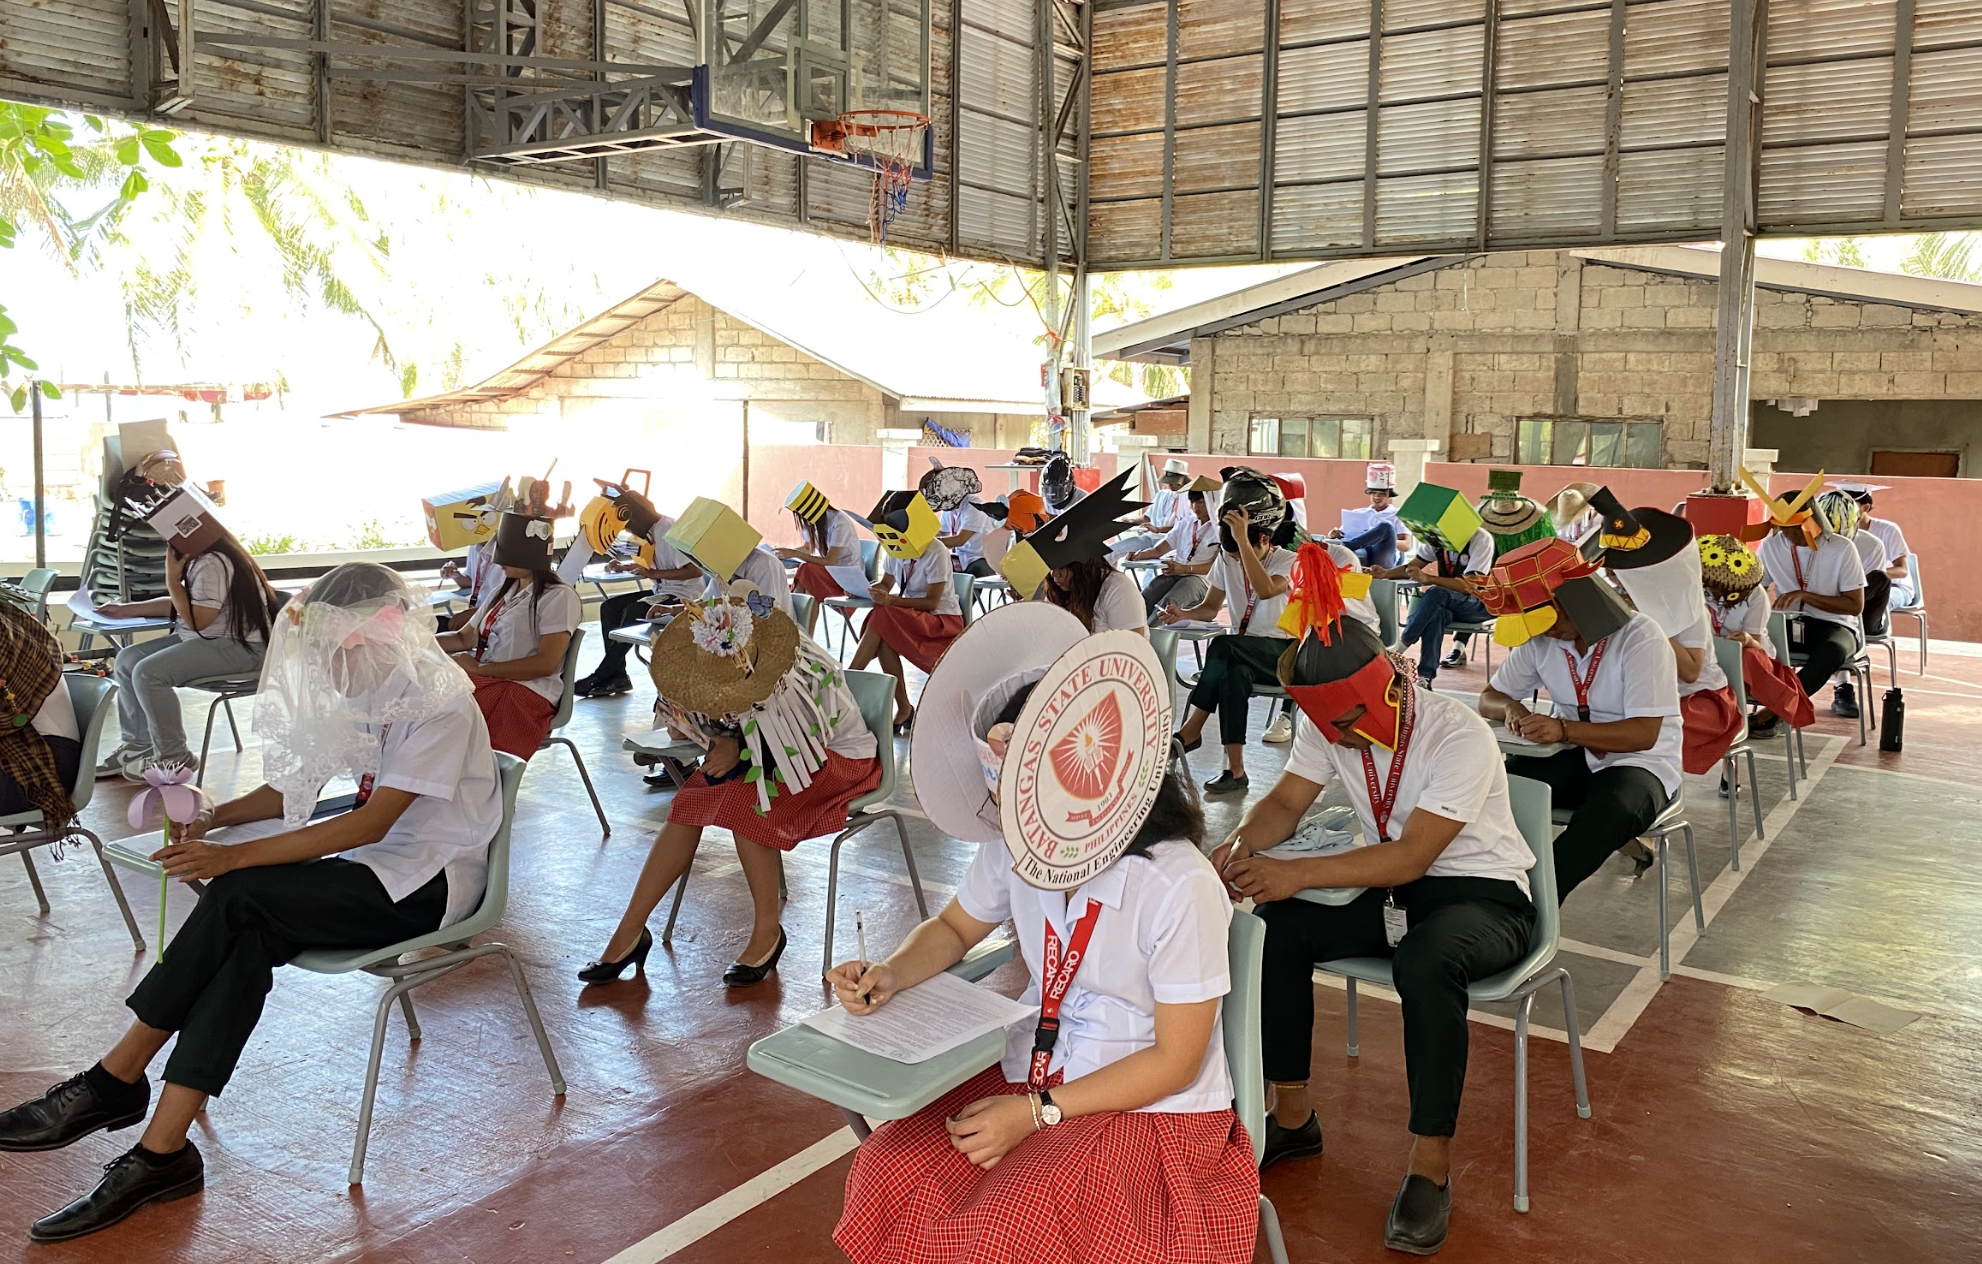 Students wearing face shields and various hats sit in a classroom setup with desks socially distanced